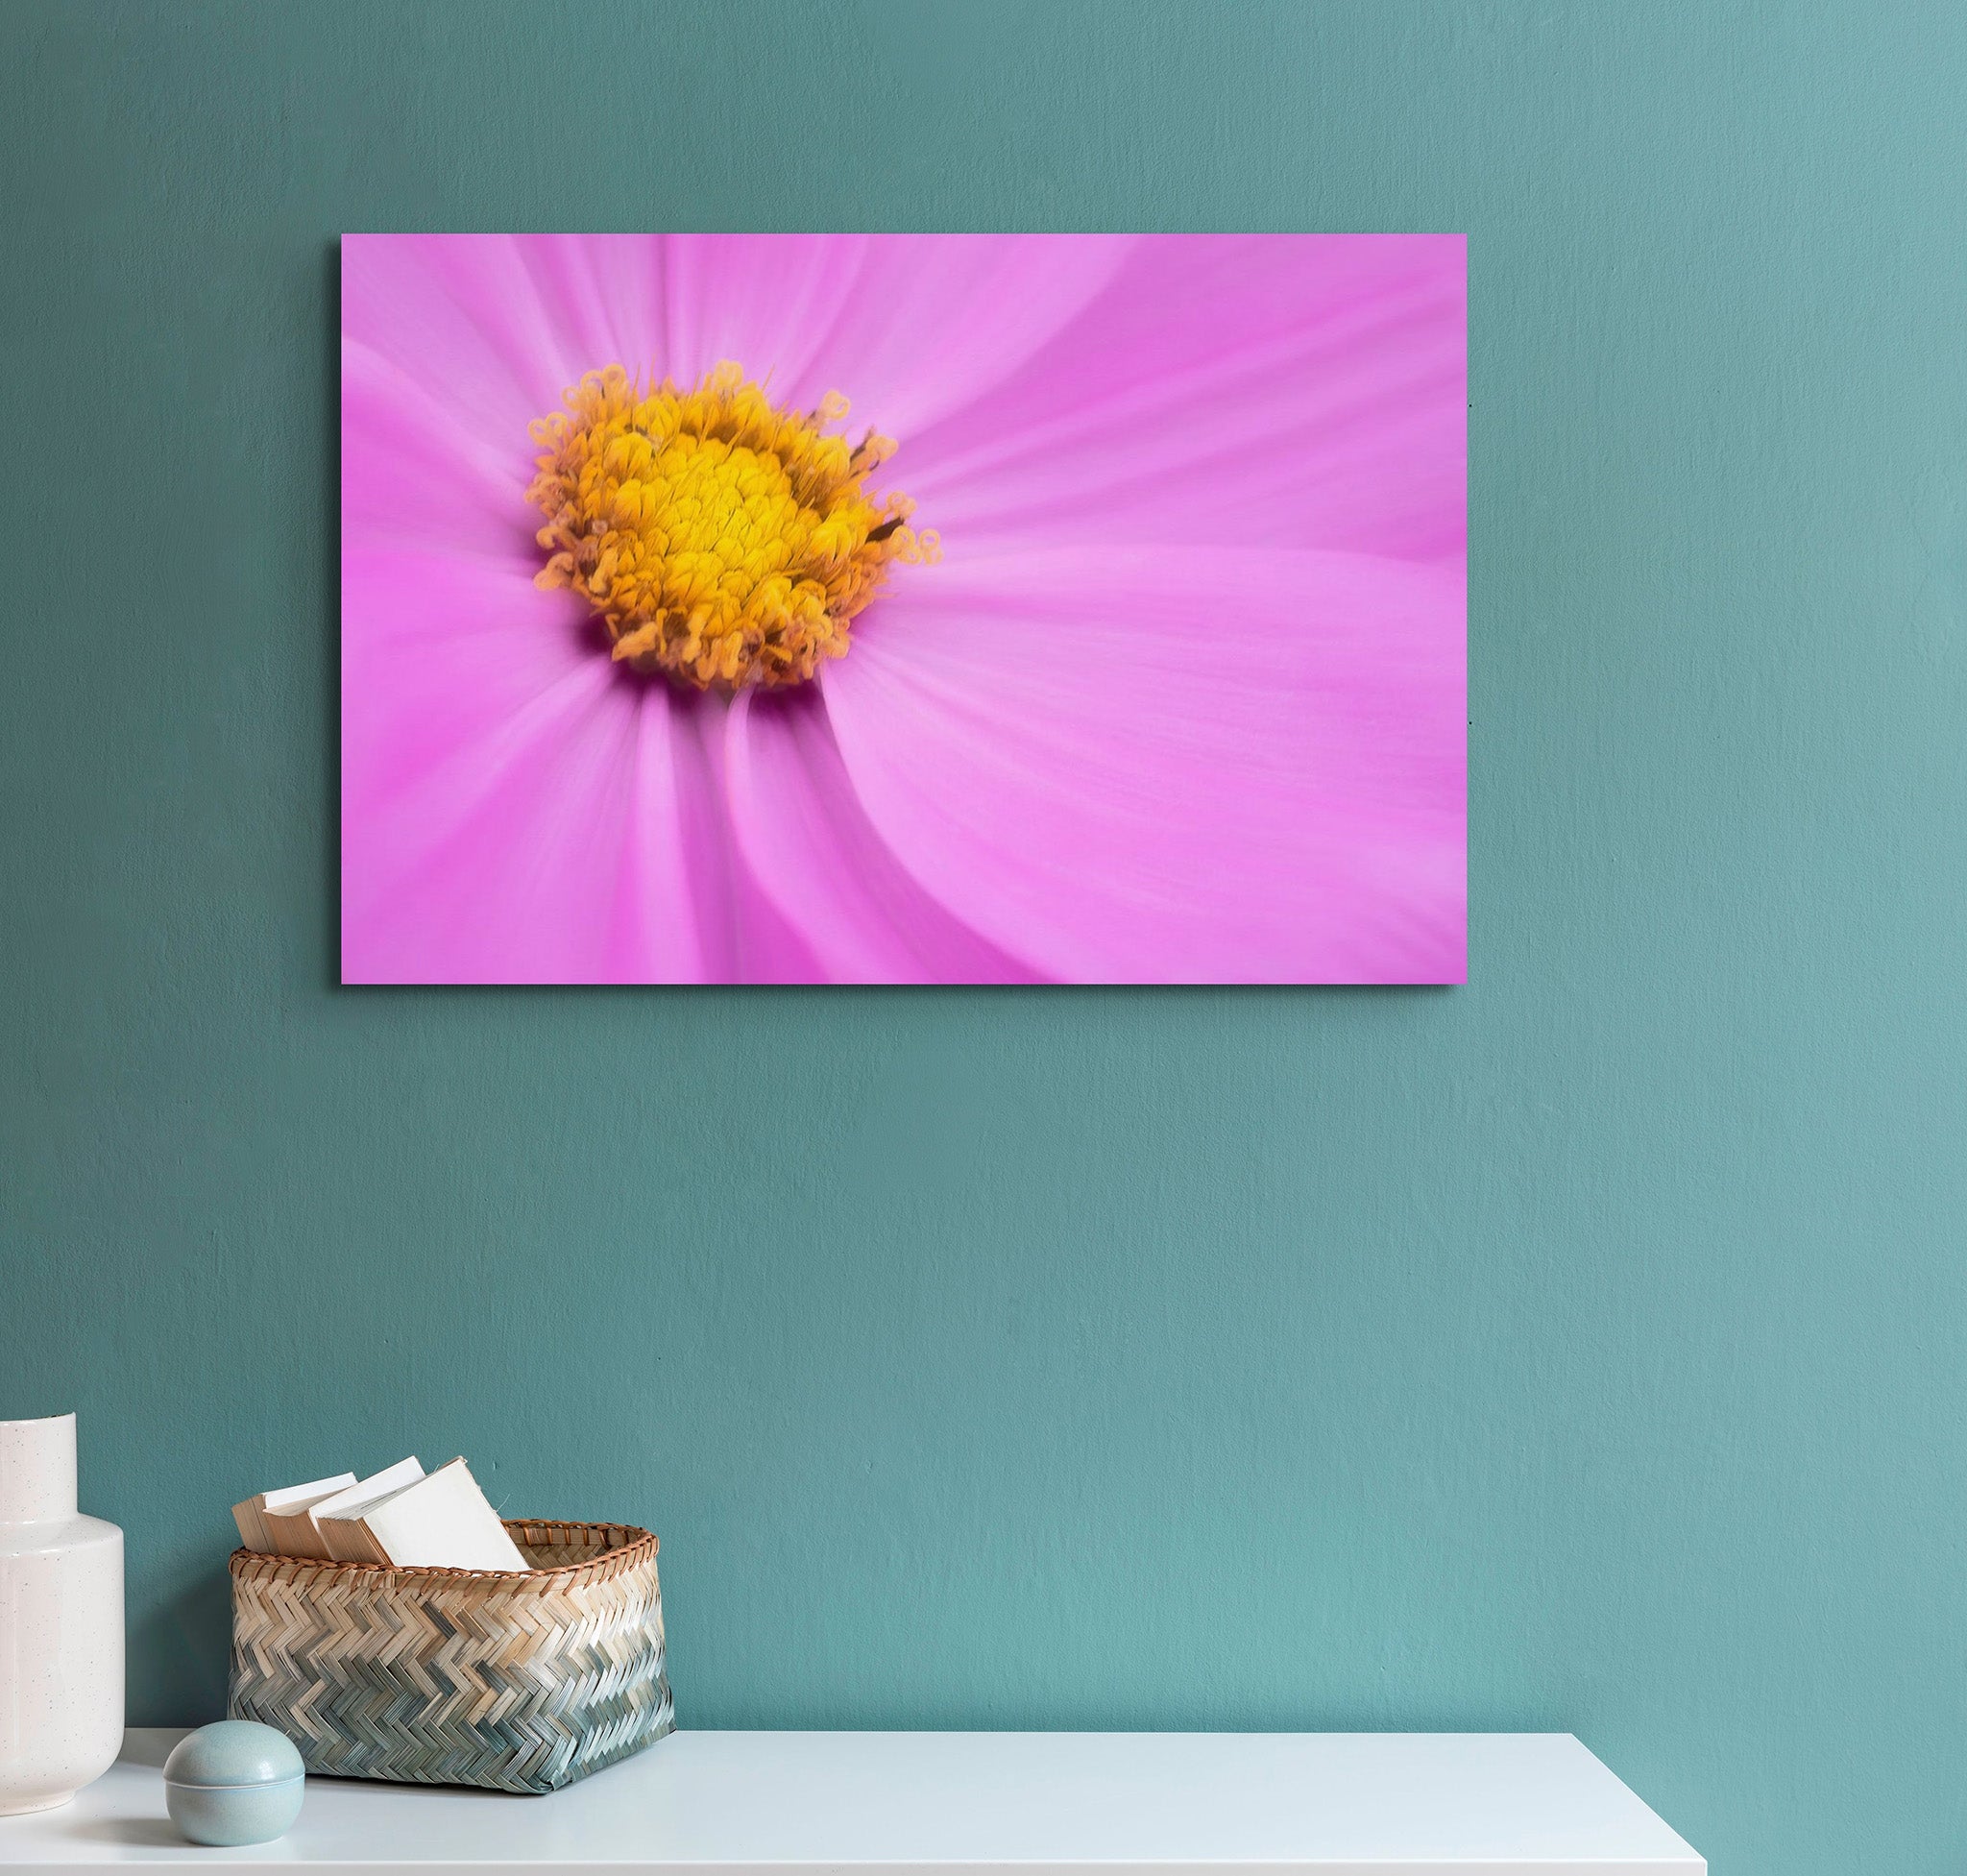 Picture hanging on a green wall with a countertop underneath. The countertop has a basket on it and some other miscellaneous items. The picture is a macro photograph of purple cosmopolitan flower by Cameron Dreaux. 